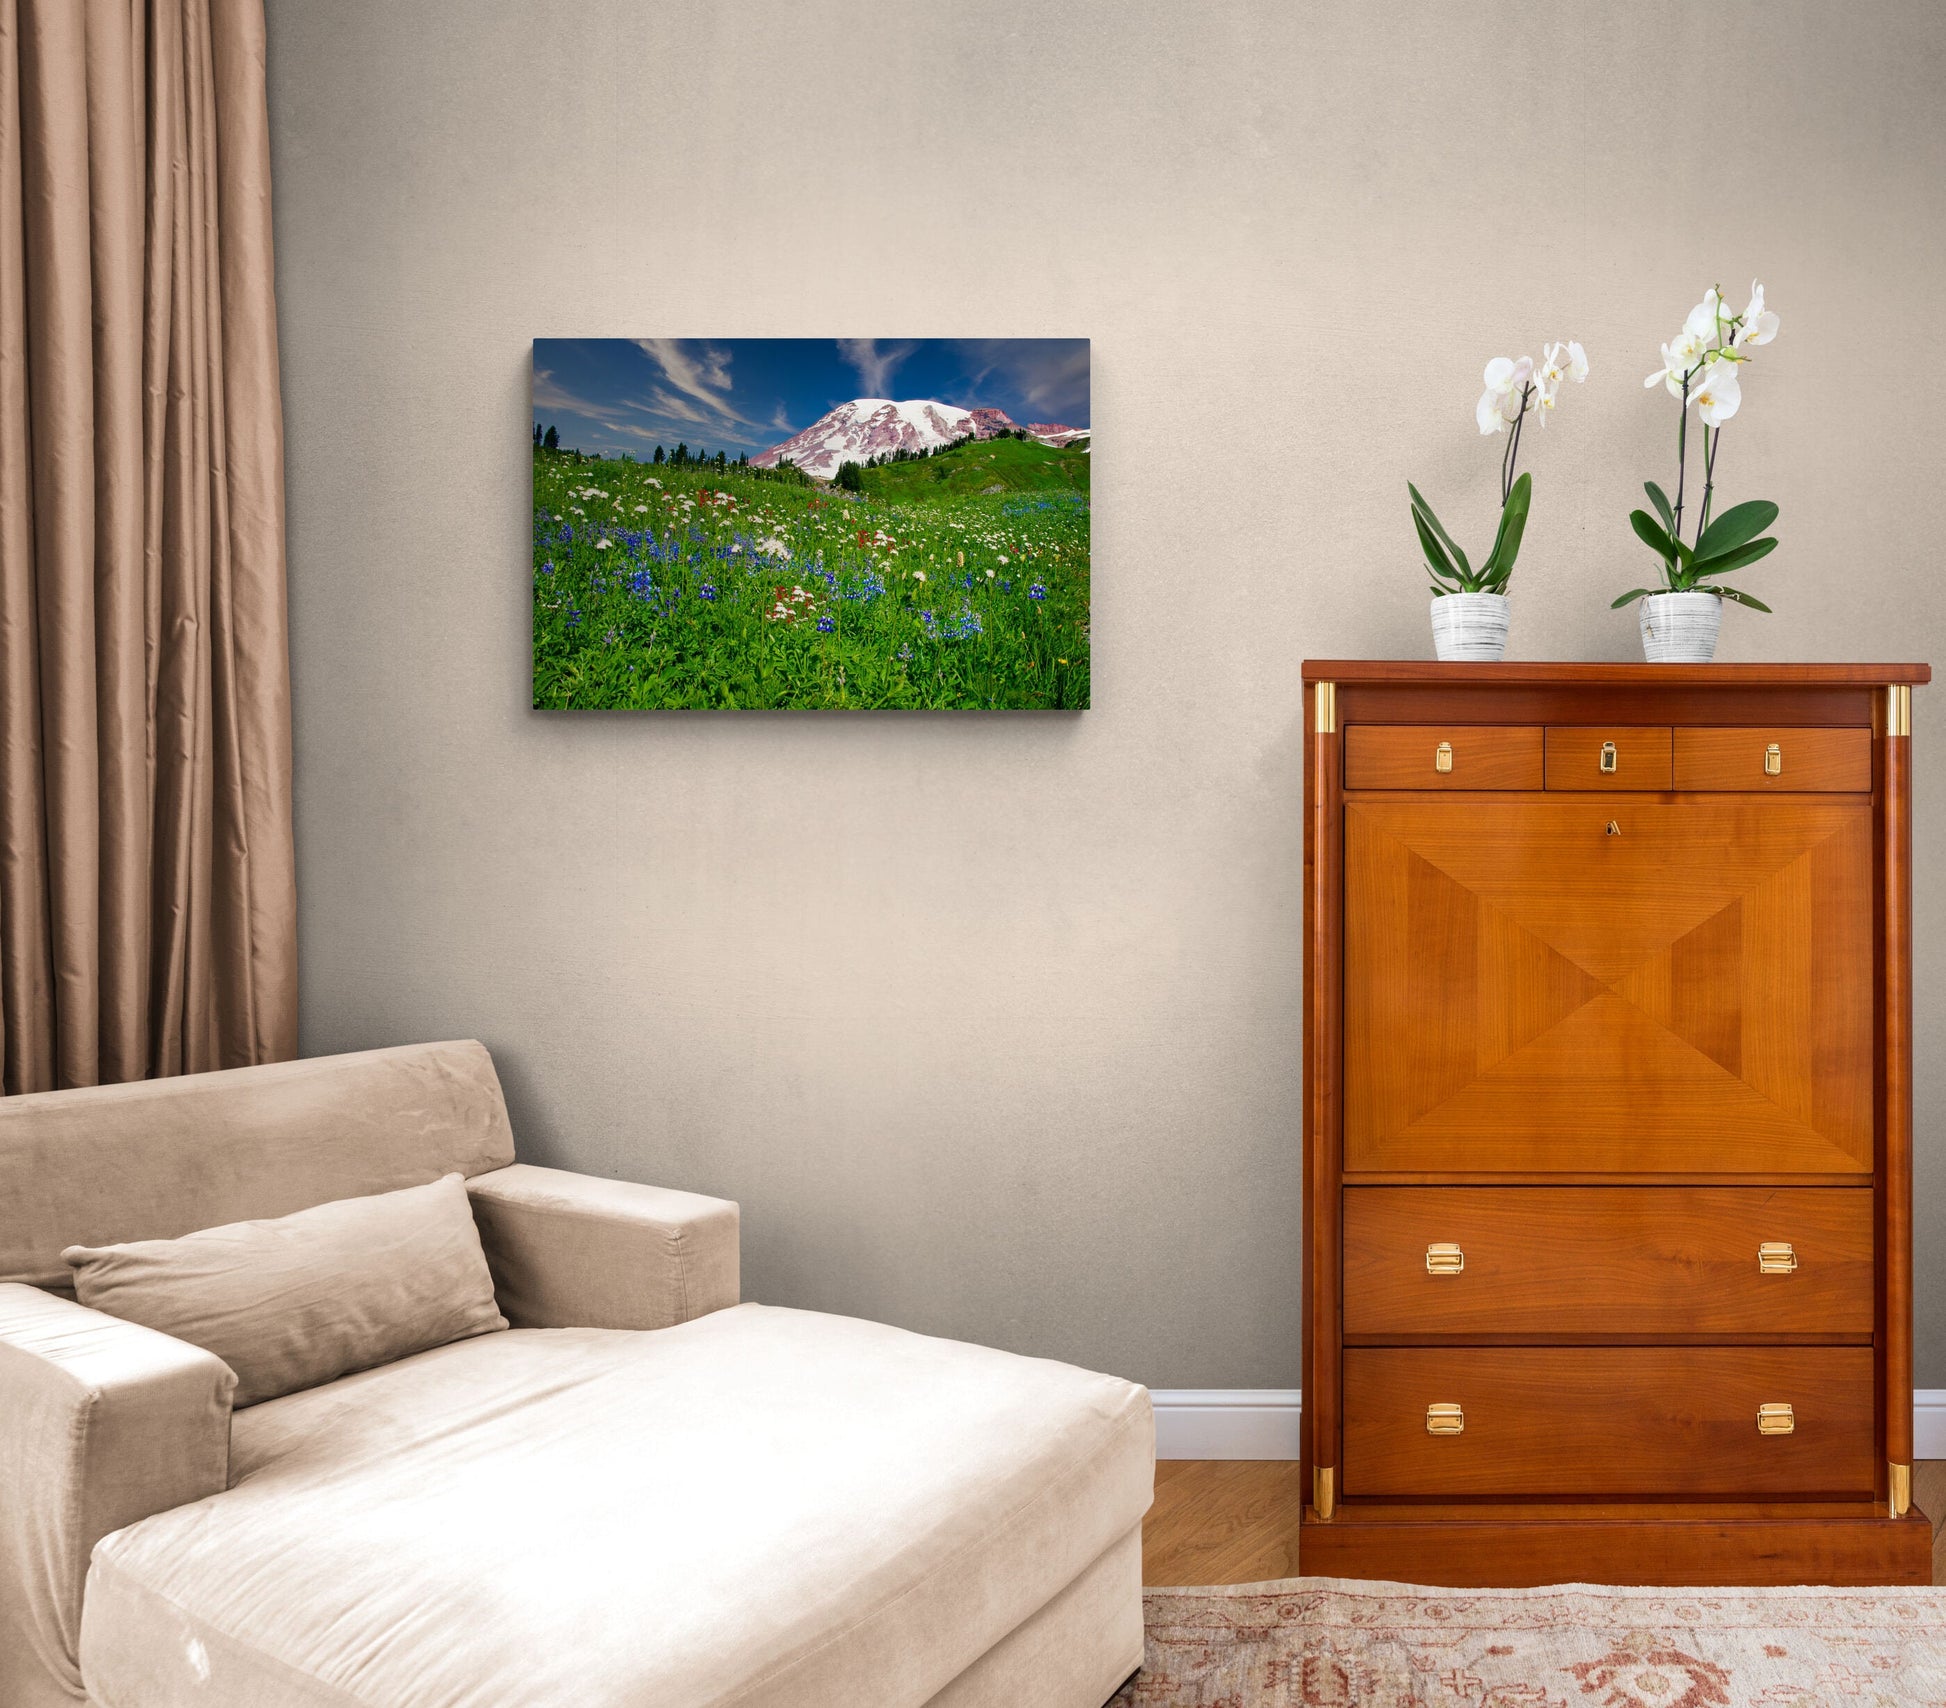 Wildflowers on Mountainside, Mt. Ranier National Park, Snowy Mountain Landscape, Wall Decor Ideal for Home, Living Room, Bedroom Or Office